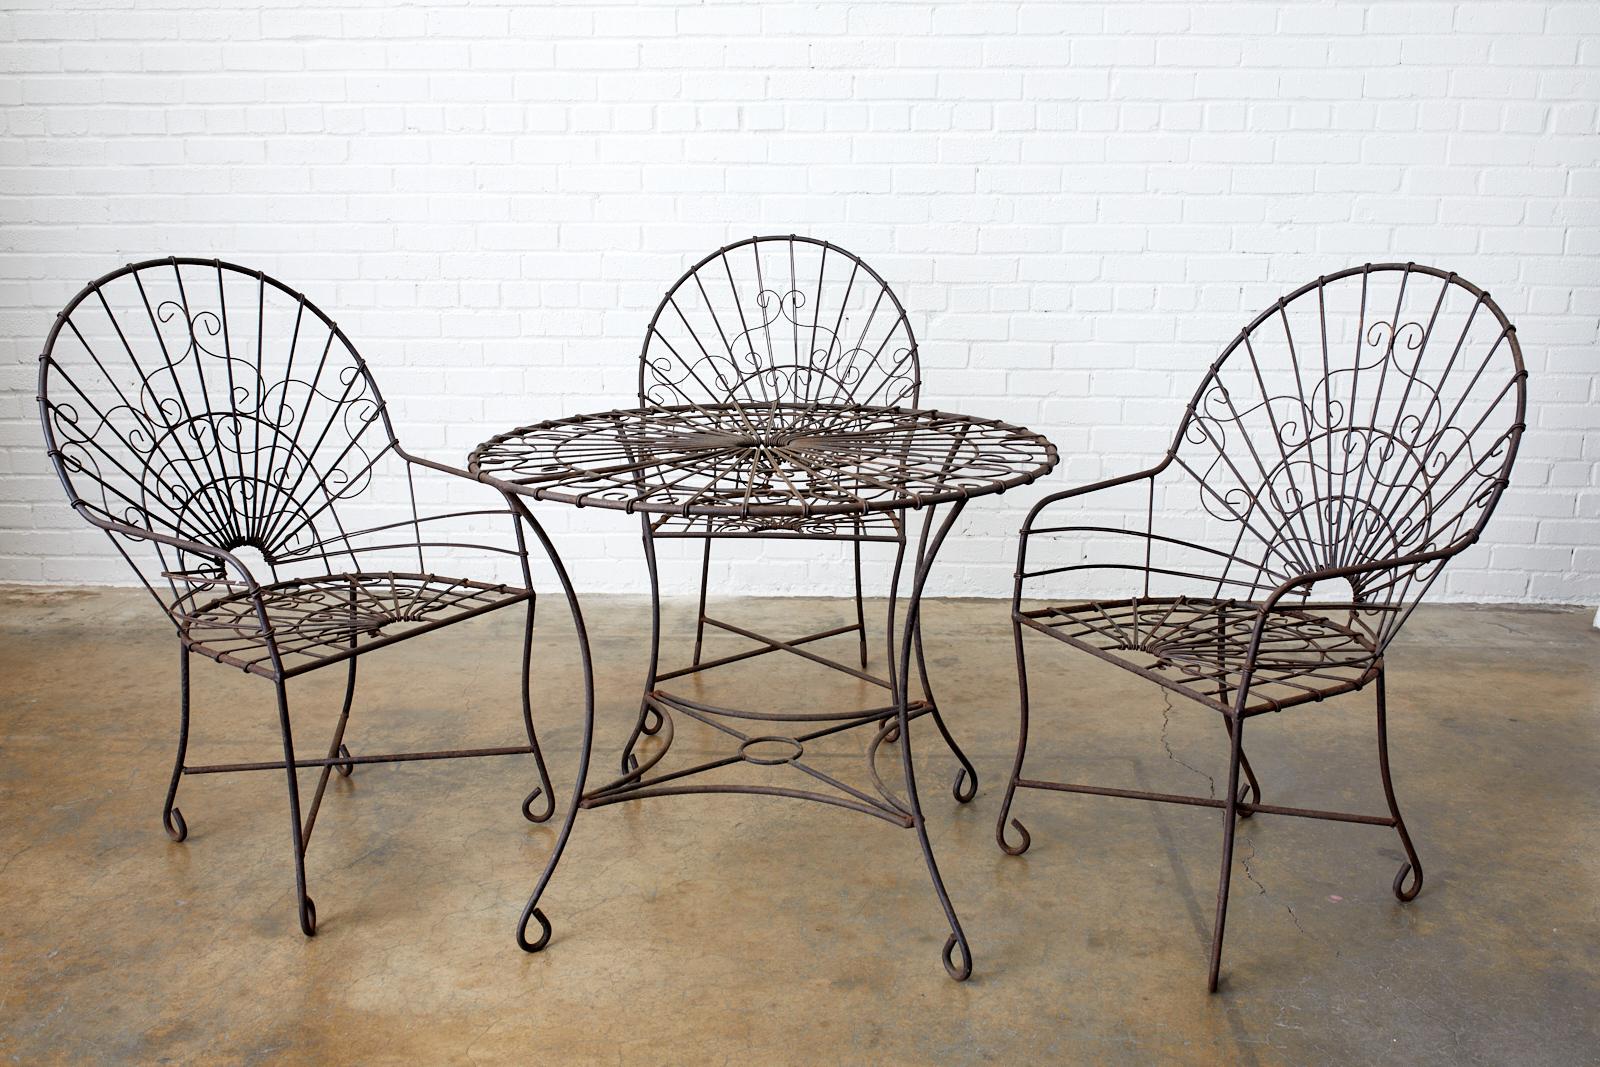 Distinctive set of four French Art Nouveau iron and wire patio garden chairs. The chairs feature a fan back or peacock style back design with wire work decorating the frames. Supported by legs ending with whimsical looped feet. Beautifully aged